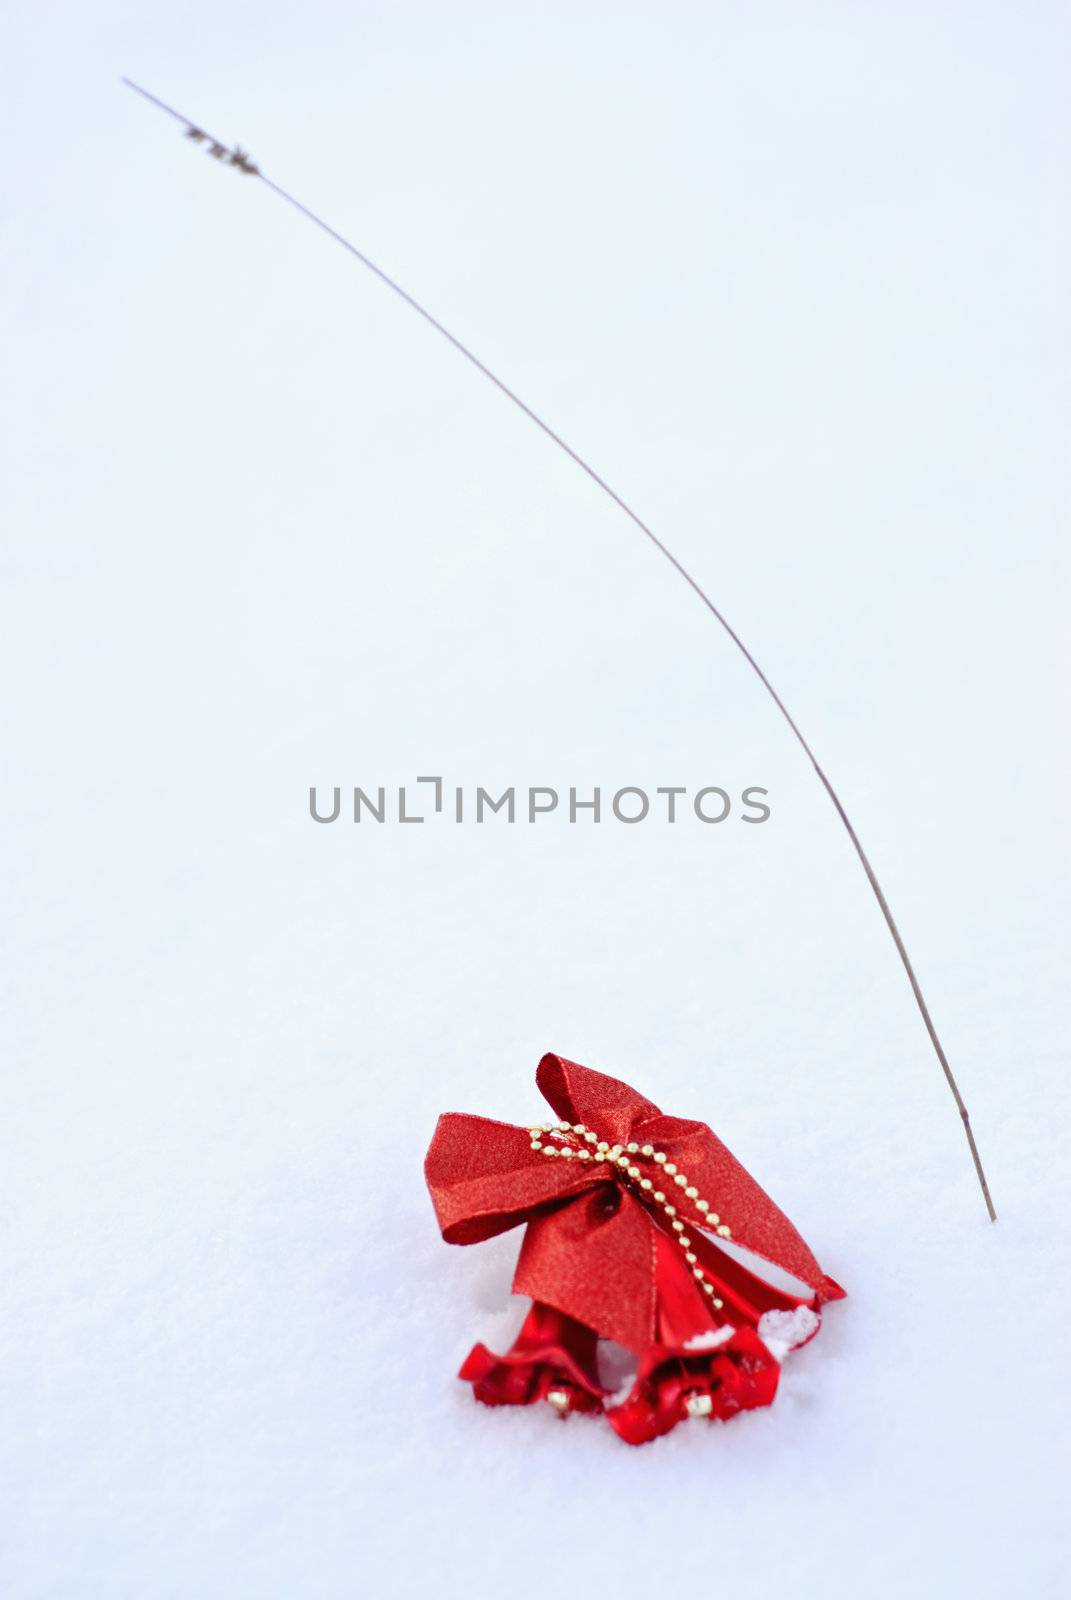 The bright tone. Festive decoration of red lies in the snow